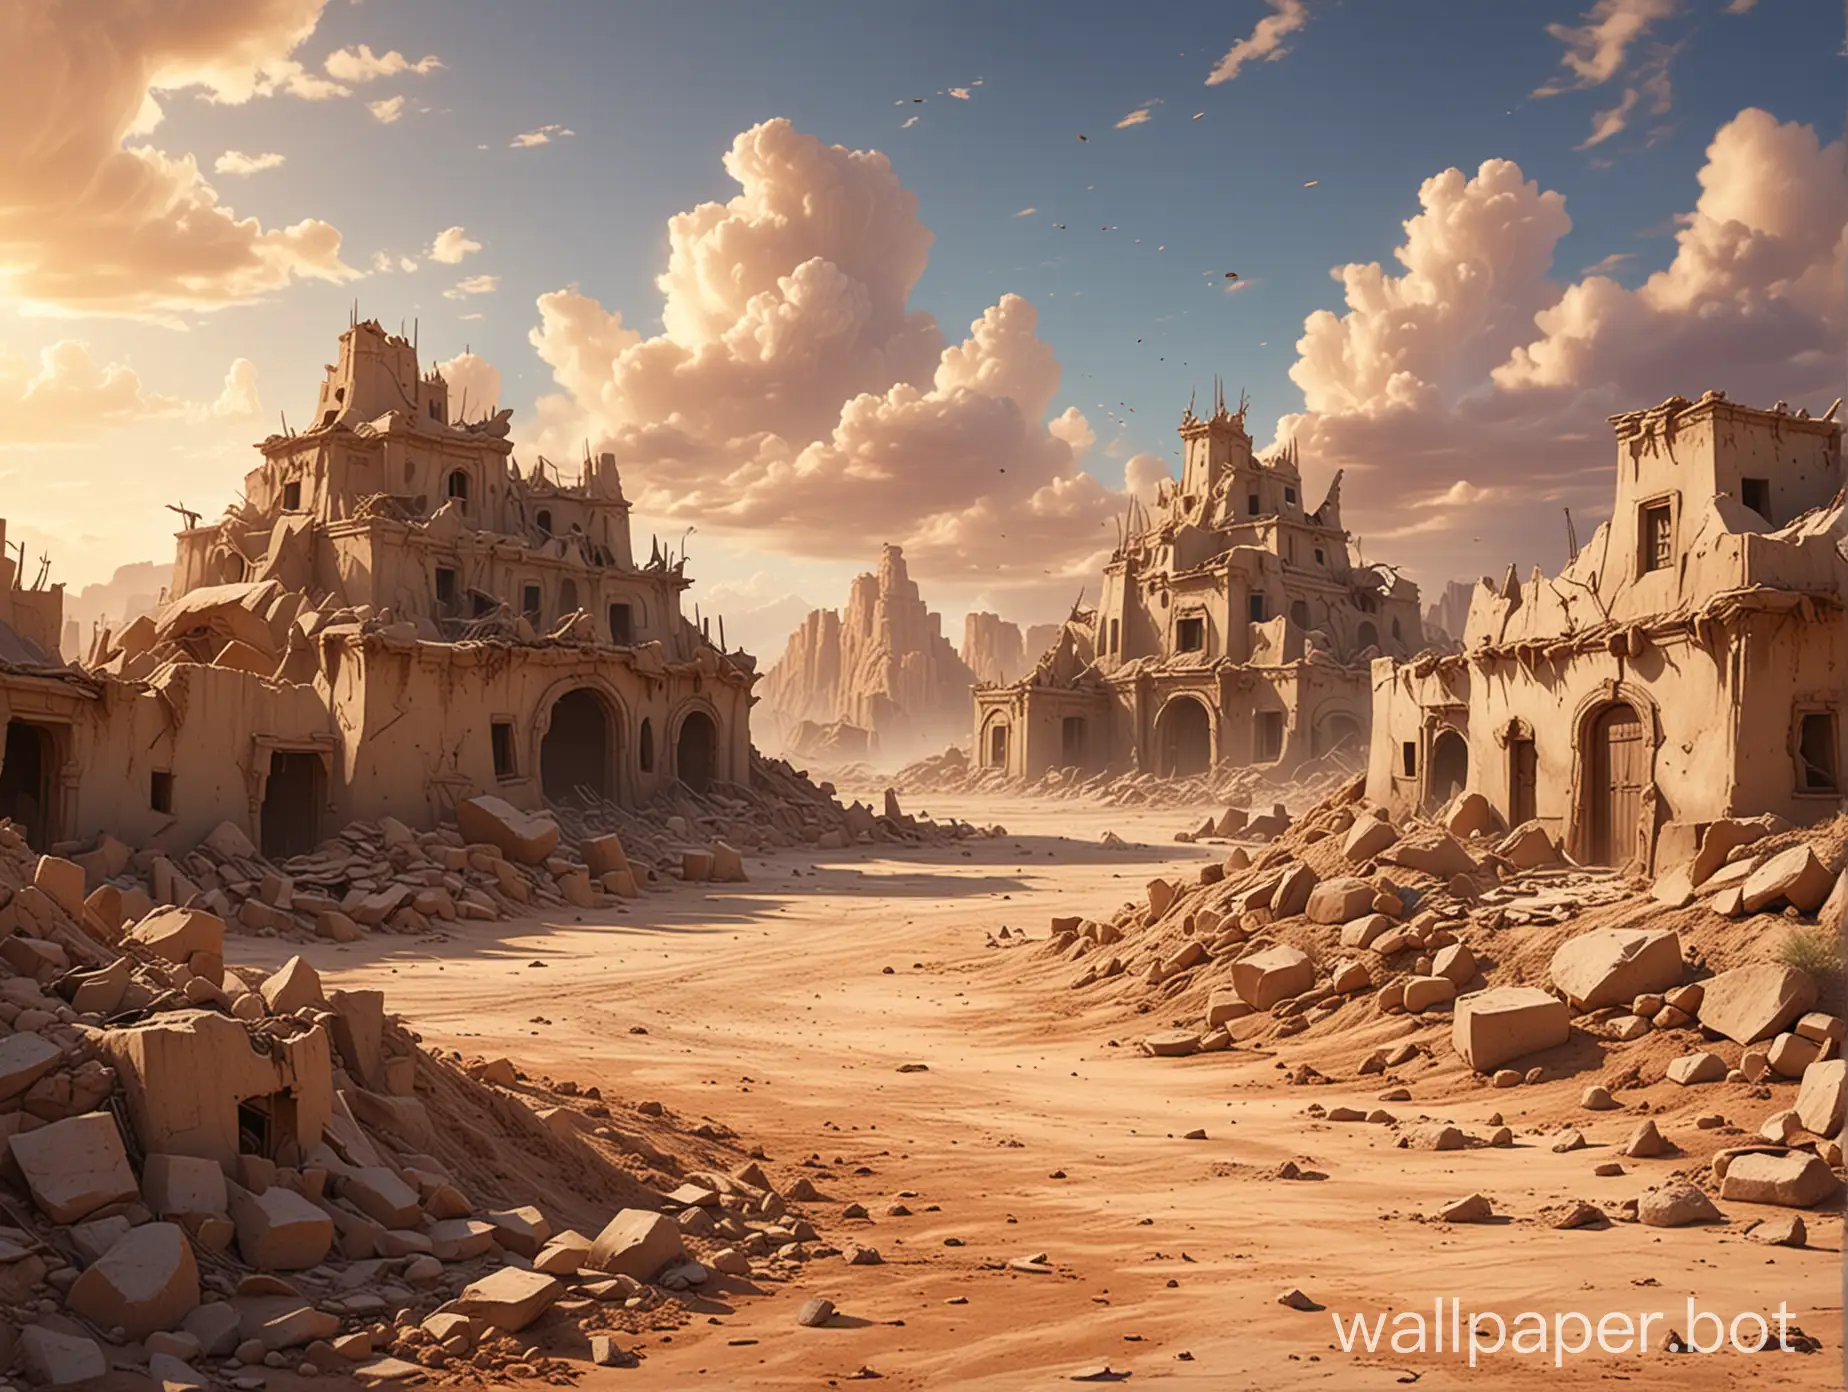 Fantasy desert land with huge pile of demolished sand buildings fully destroyed in the back and plain ground in front, beautiful sky, realistic and highly detailed, Disney style, Pixar style.
